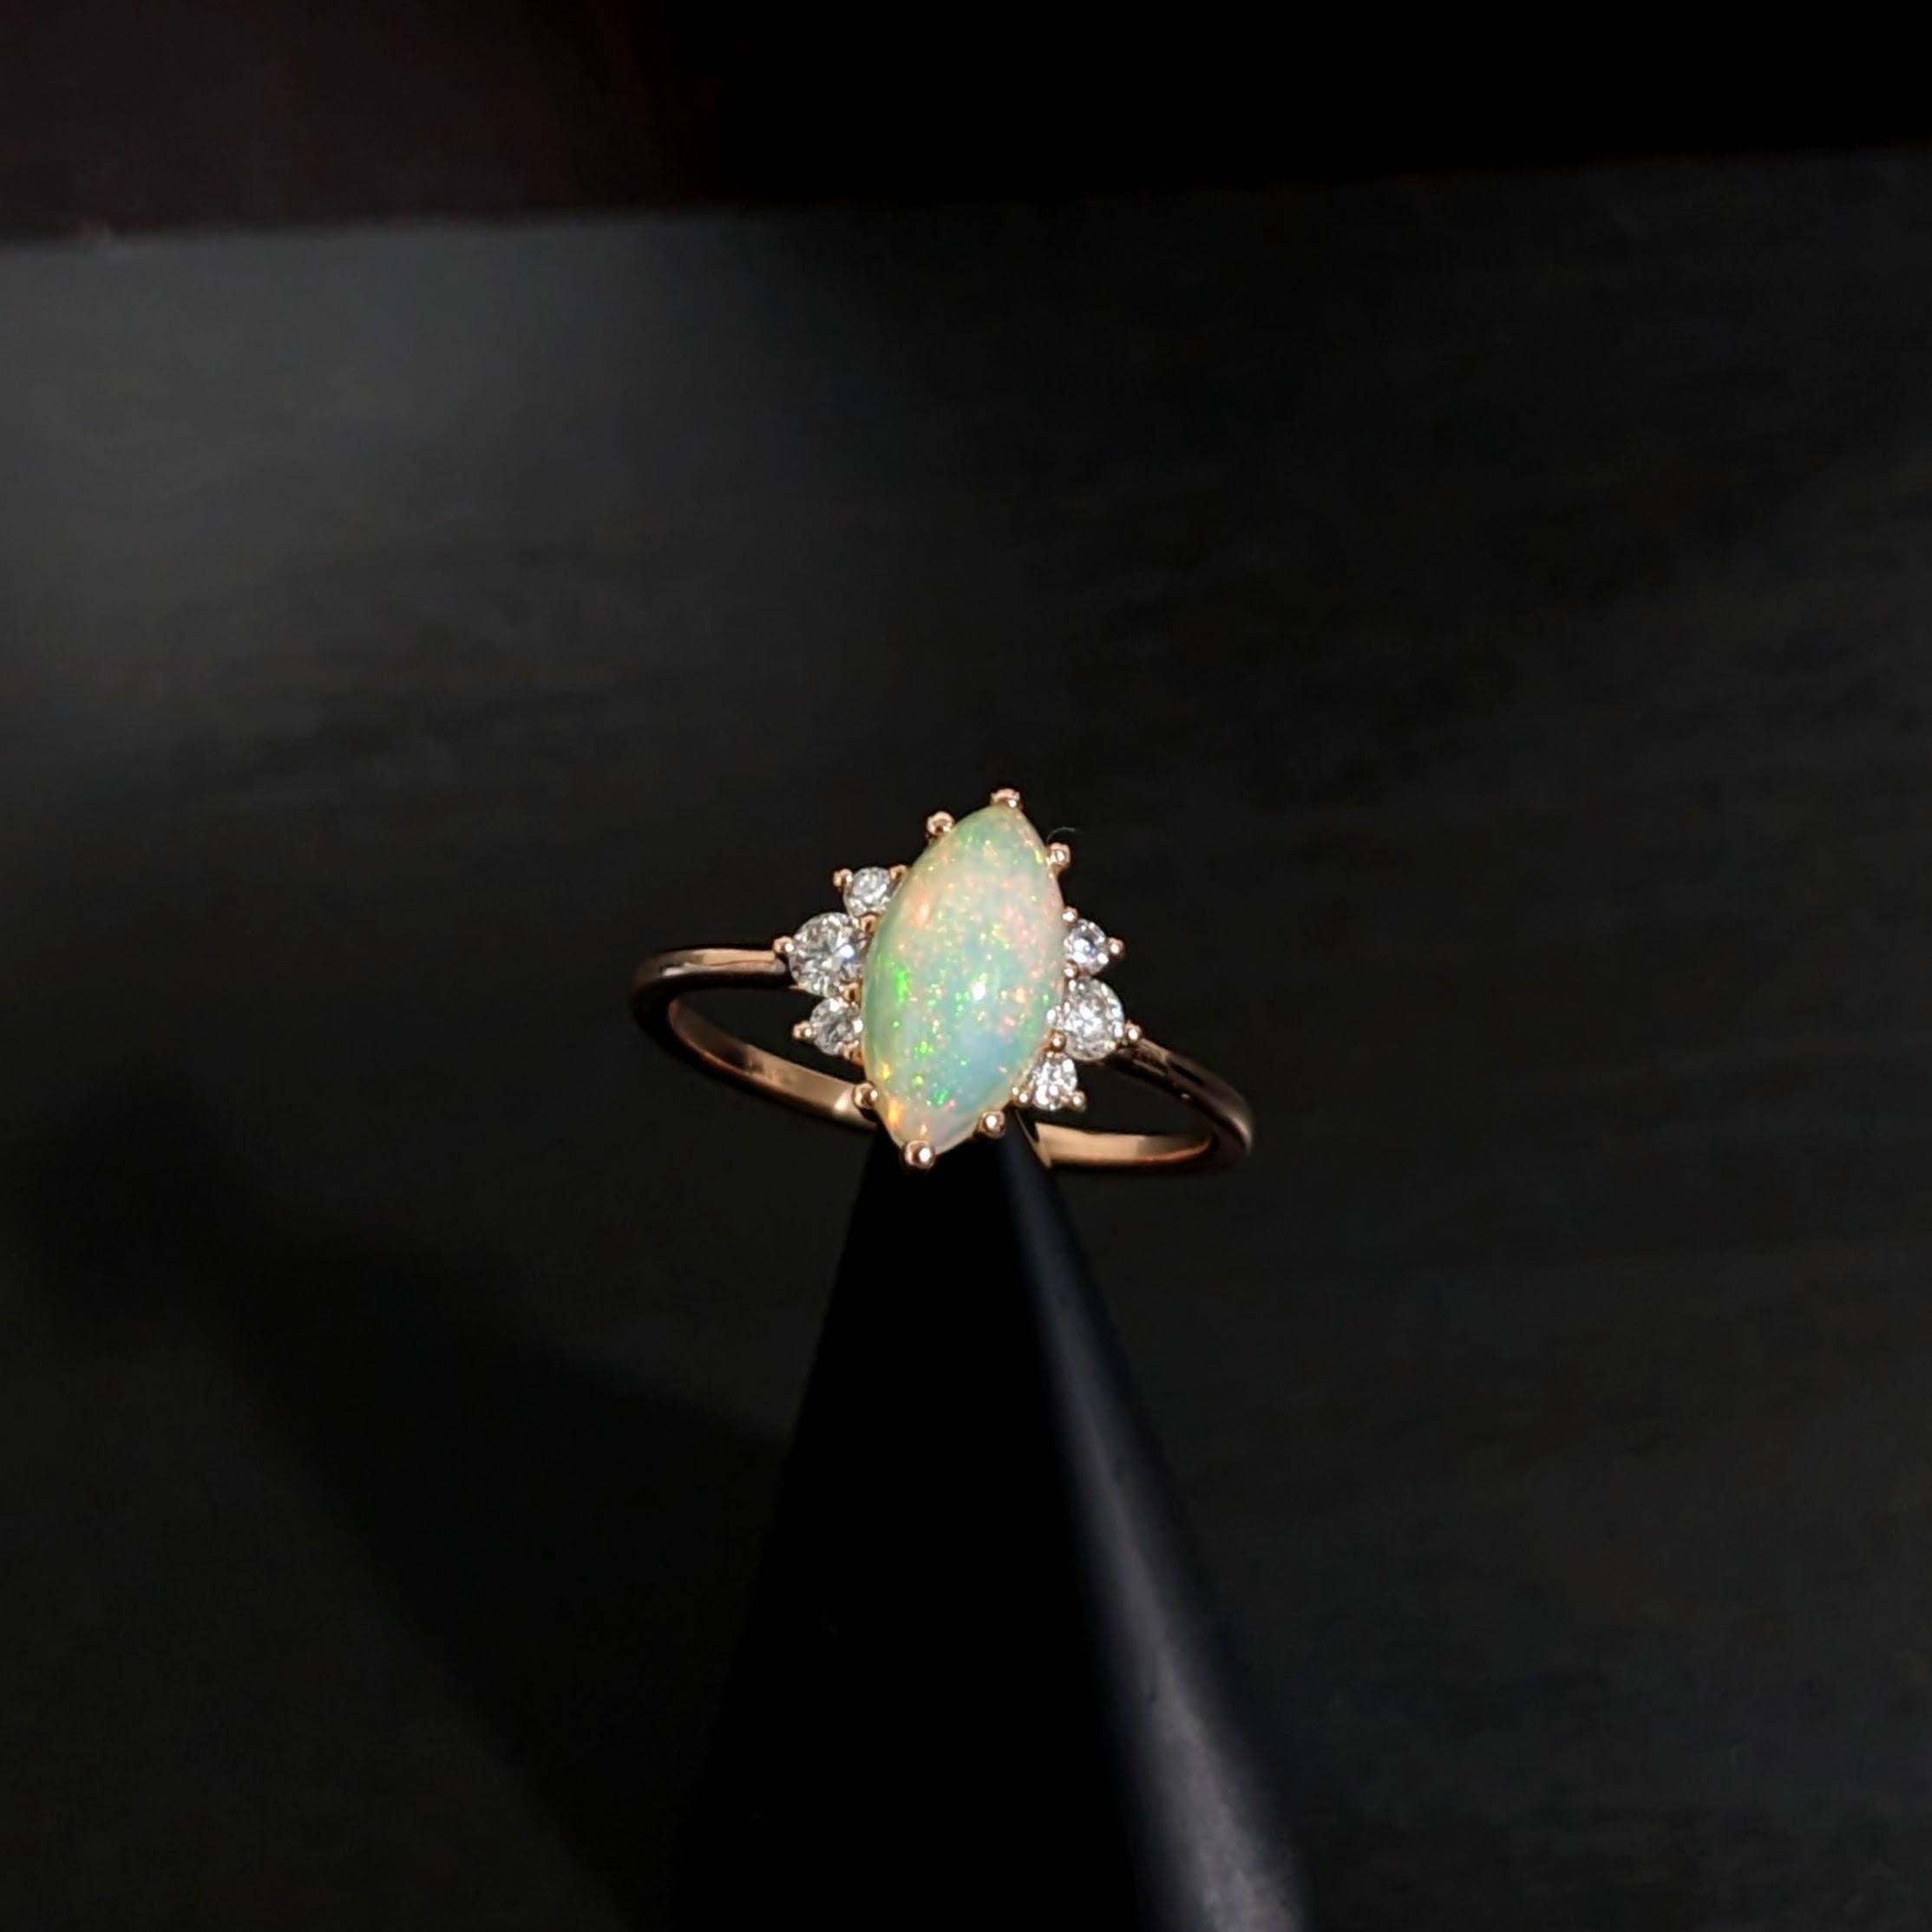 This lovely Opal has all the colors of the rainbow, accented with natural earth mined diamond accents. This oval ring is perfect for the modern bride or that special someone in your life! This Opal ring also makes a beautiful October birthstone gift